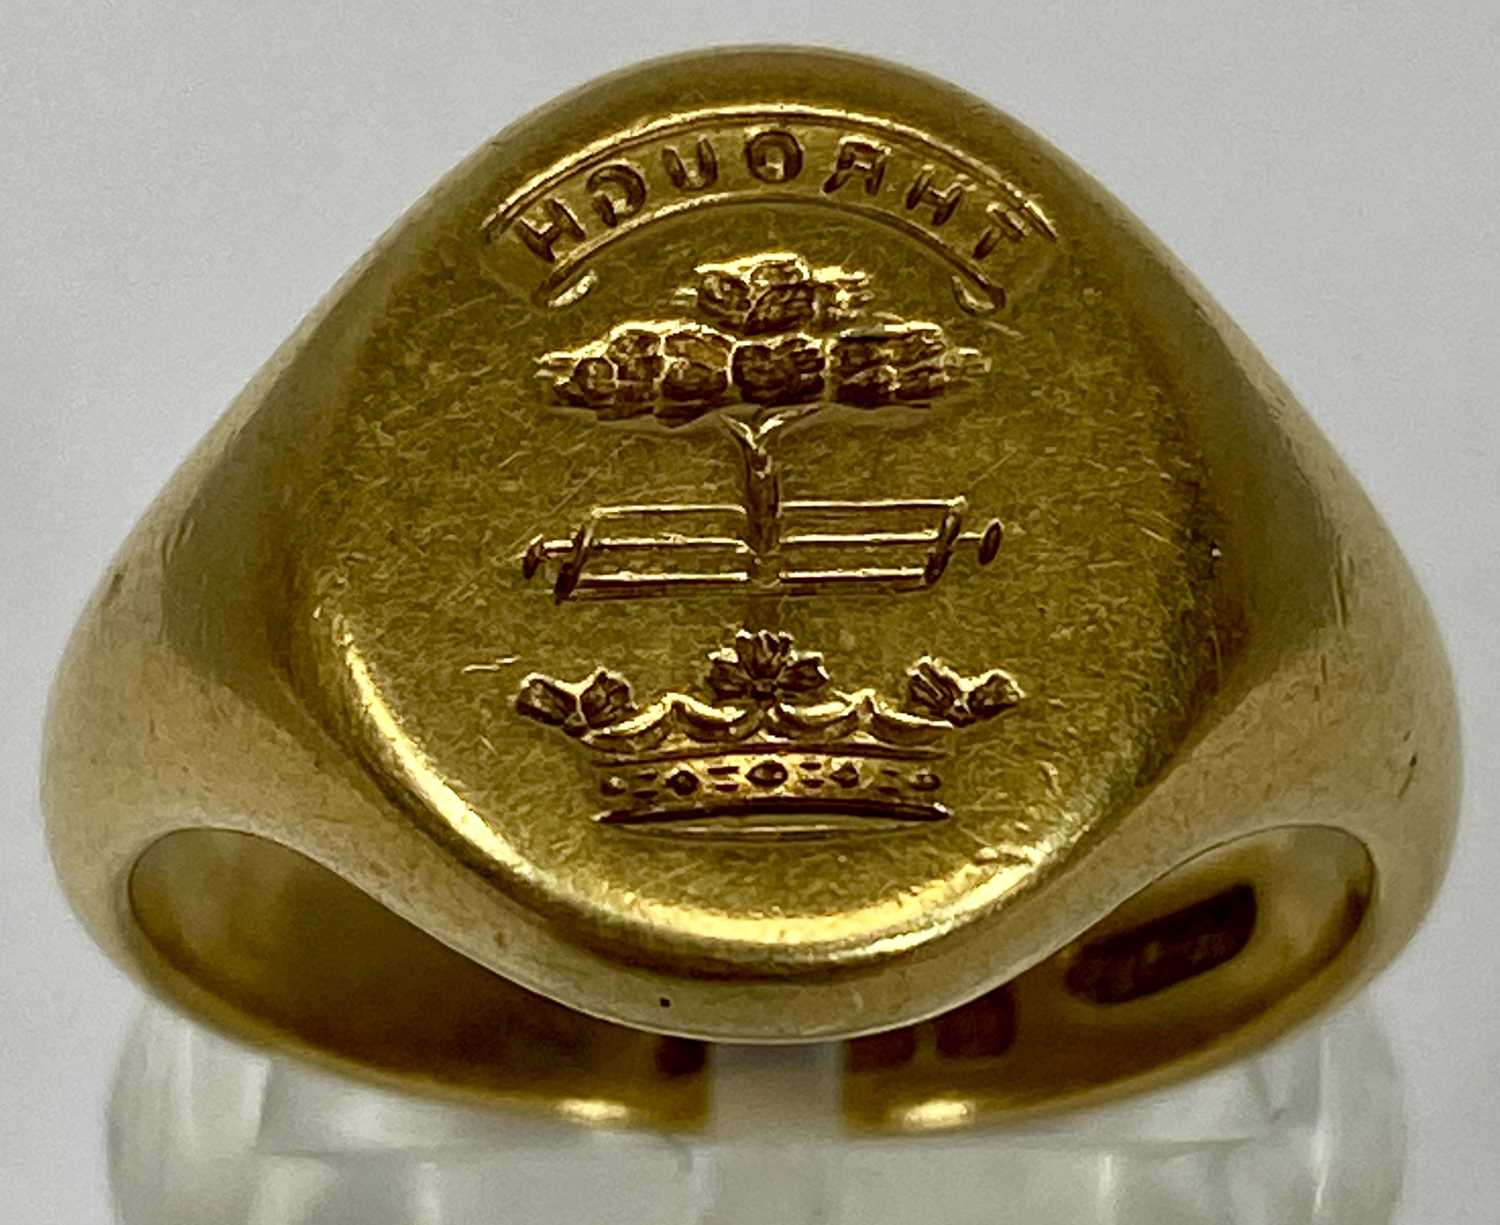 18CT GOLD SIGNET RING, engraved with crest, size M-N, 10.7gms Provenance: private collection Ynys